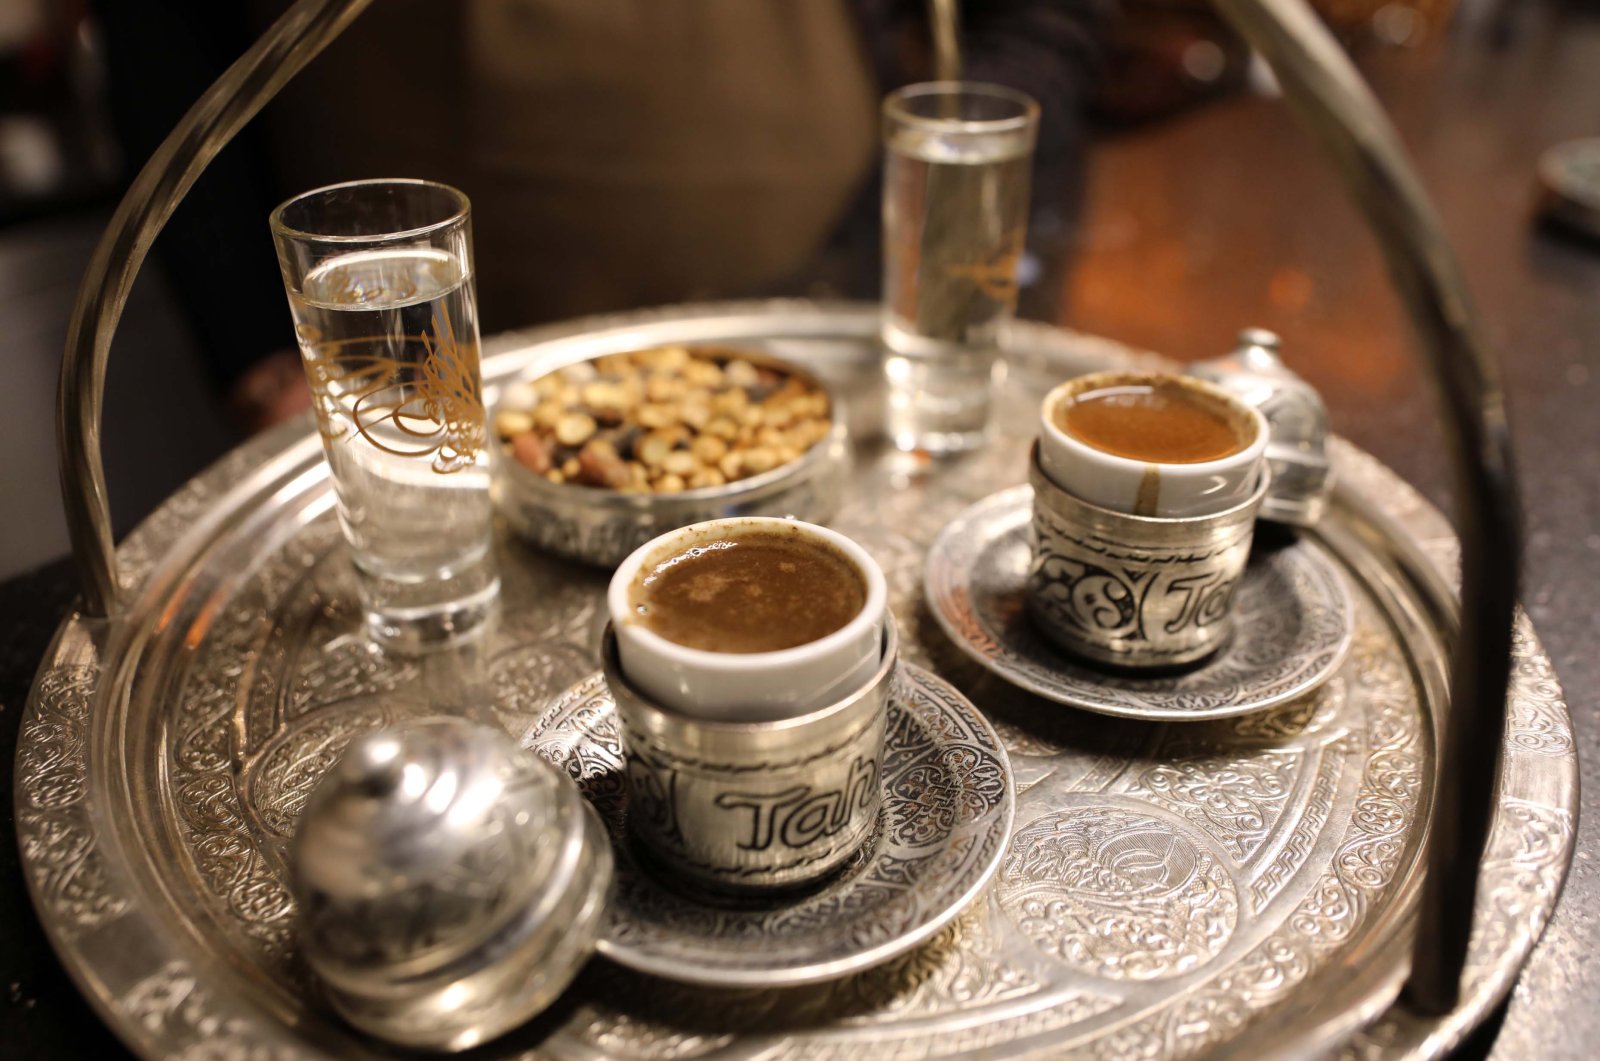 A tray of Turkish coffee is seen at a restaurant in Gaziantep, southeastern Turkey, Feb. 5, 2021. (DHA Photo)